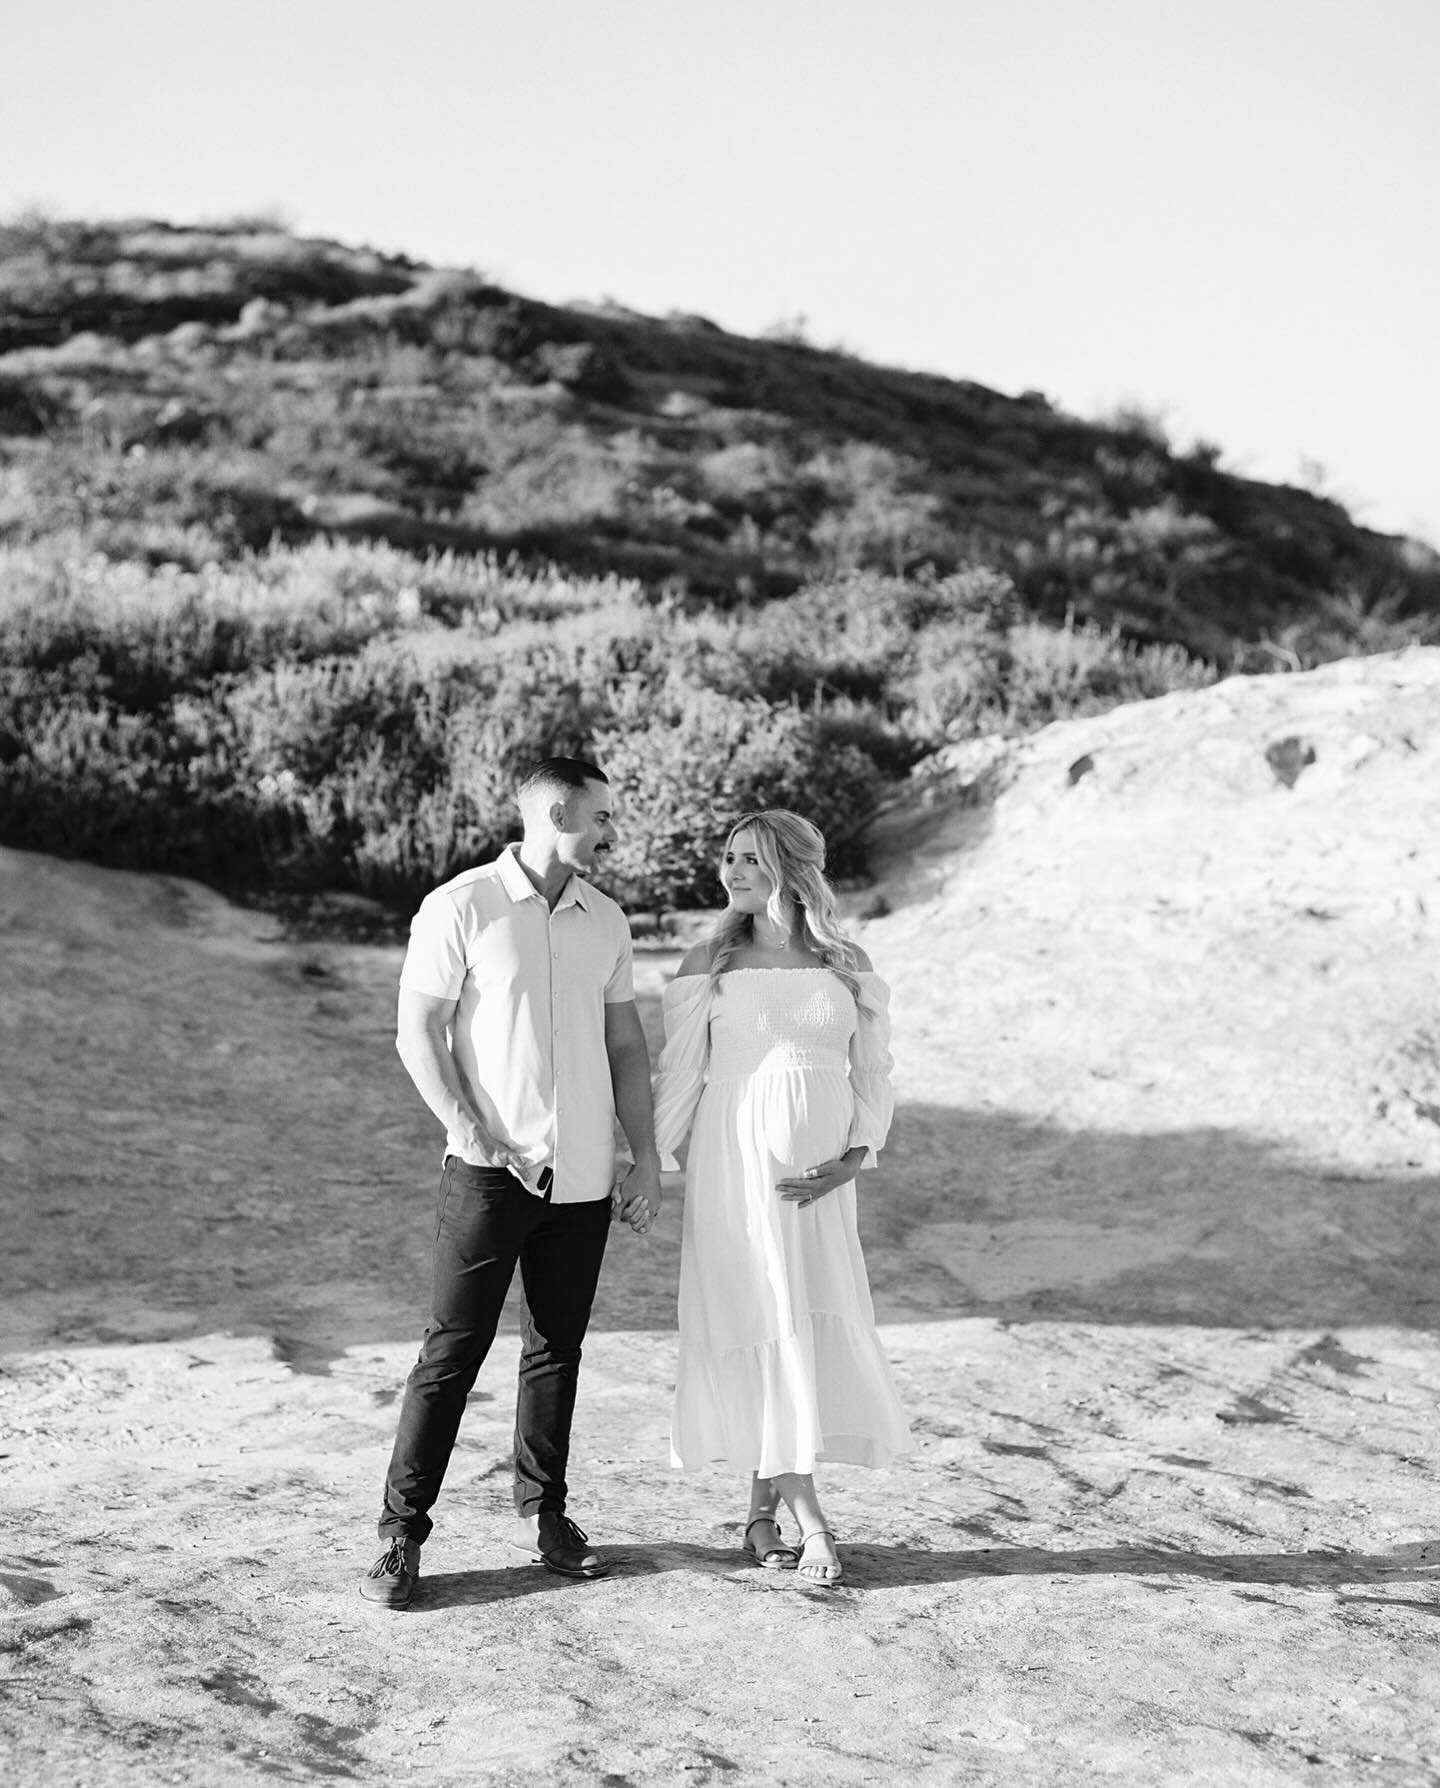 Medium format film from B + D&rsquo;s maternity session 🎞️

-

Orange County maternity photography, Irvine family photographer, Orange County family photography, LA wedding photographer, Orange County wedding photographer, film maternity photos, med